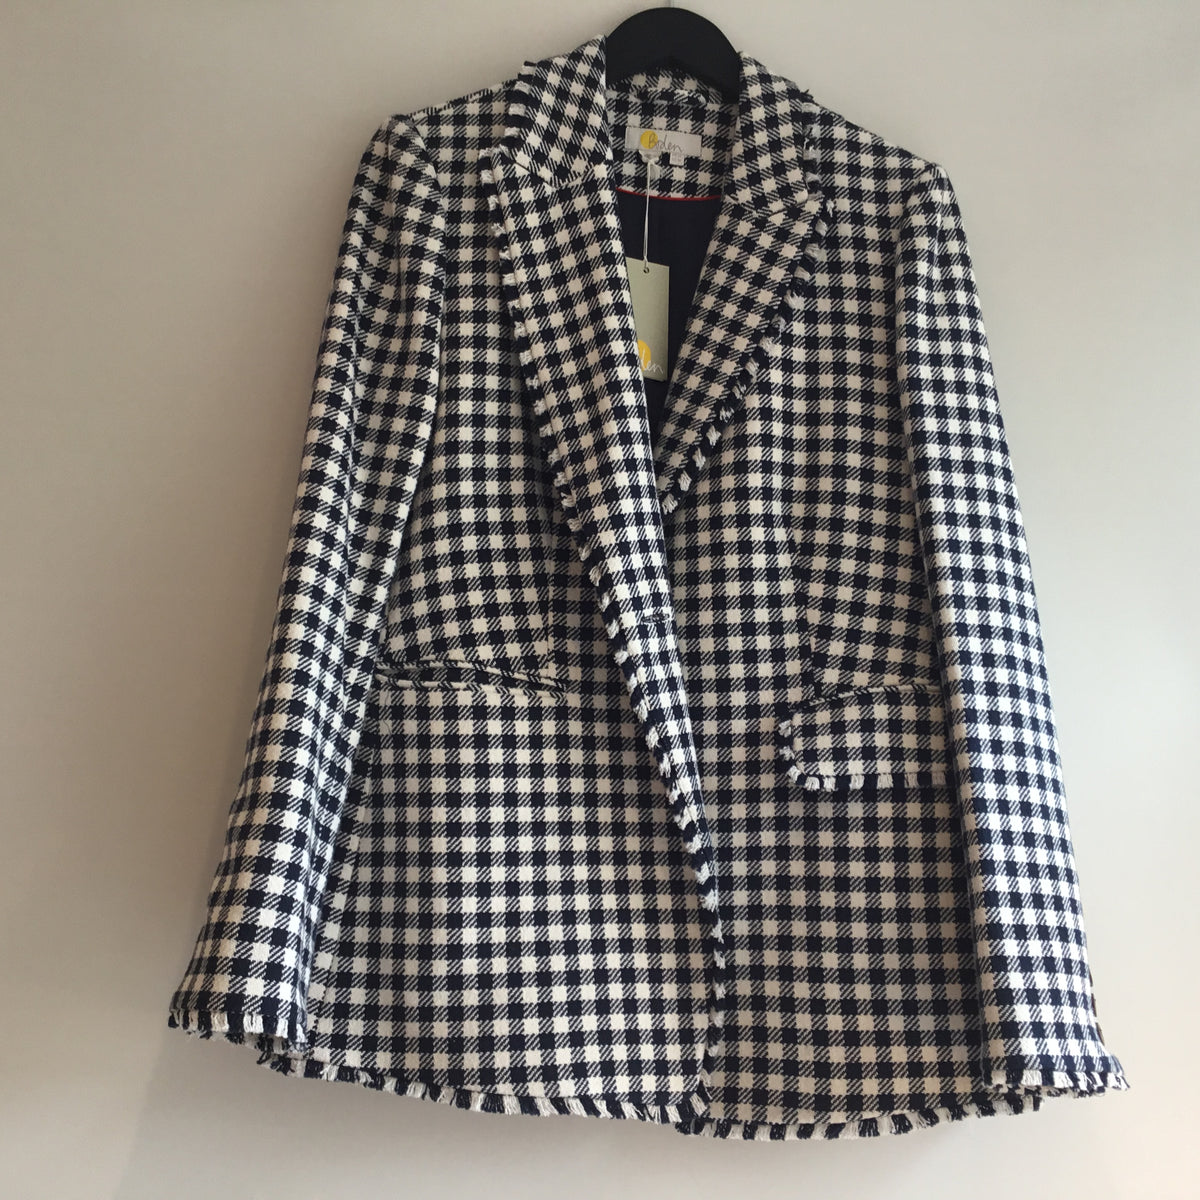 Boden fray detail dogtooth jacket Navy/White 14